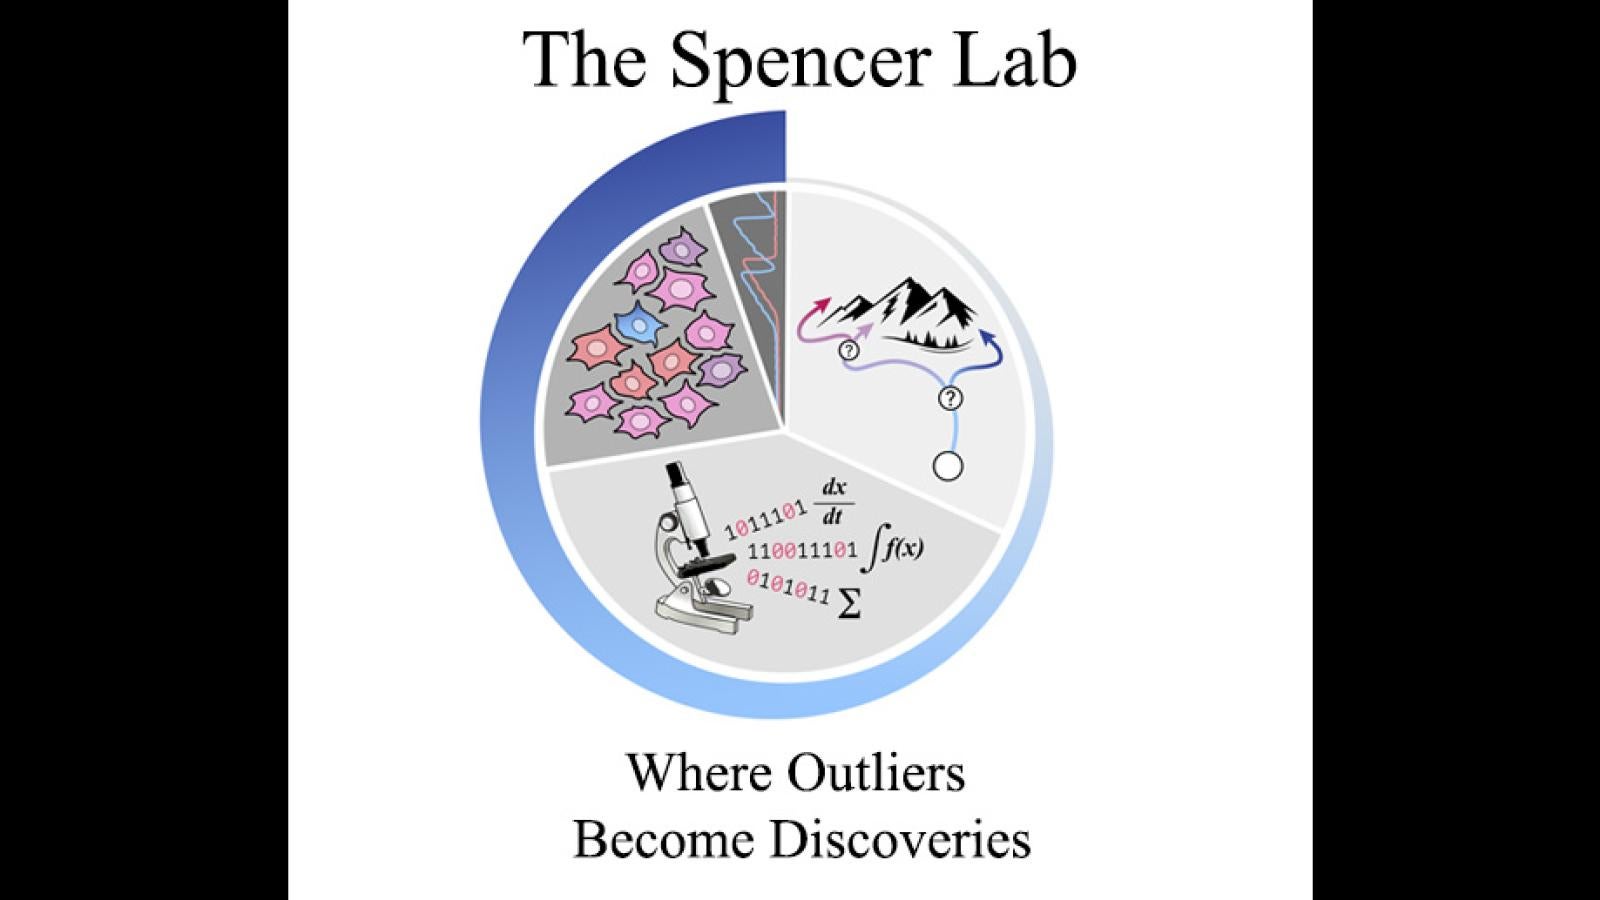 Spencer Lab Logo and Motto: Where outliers become discoveries